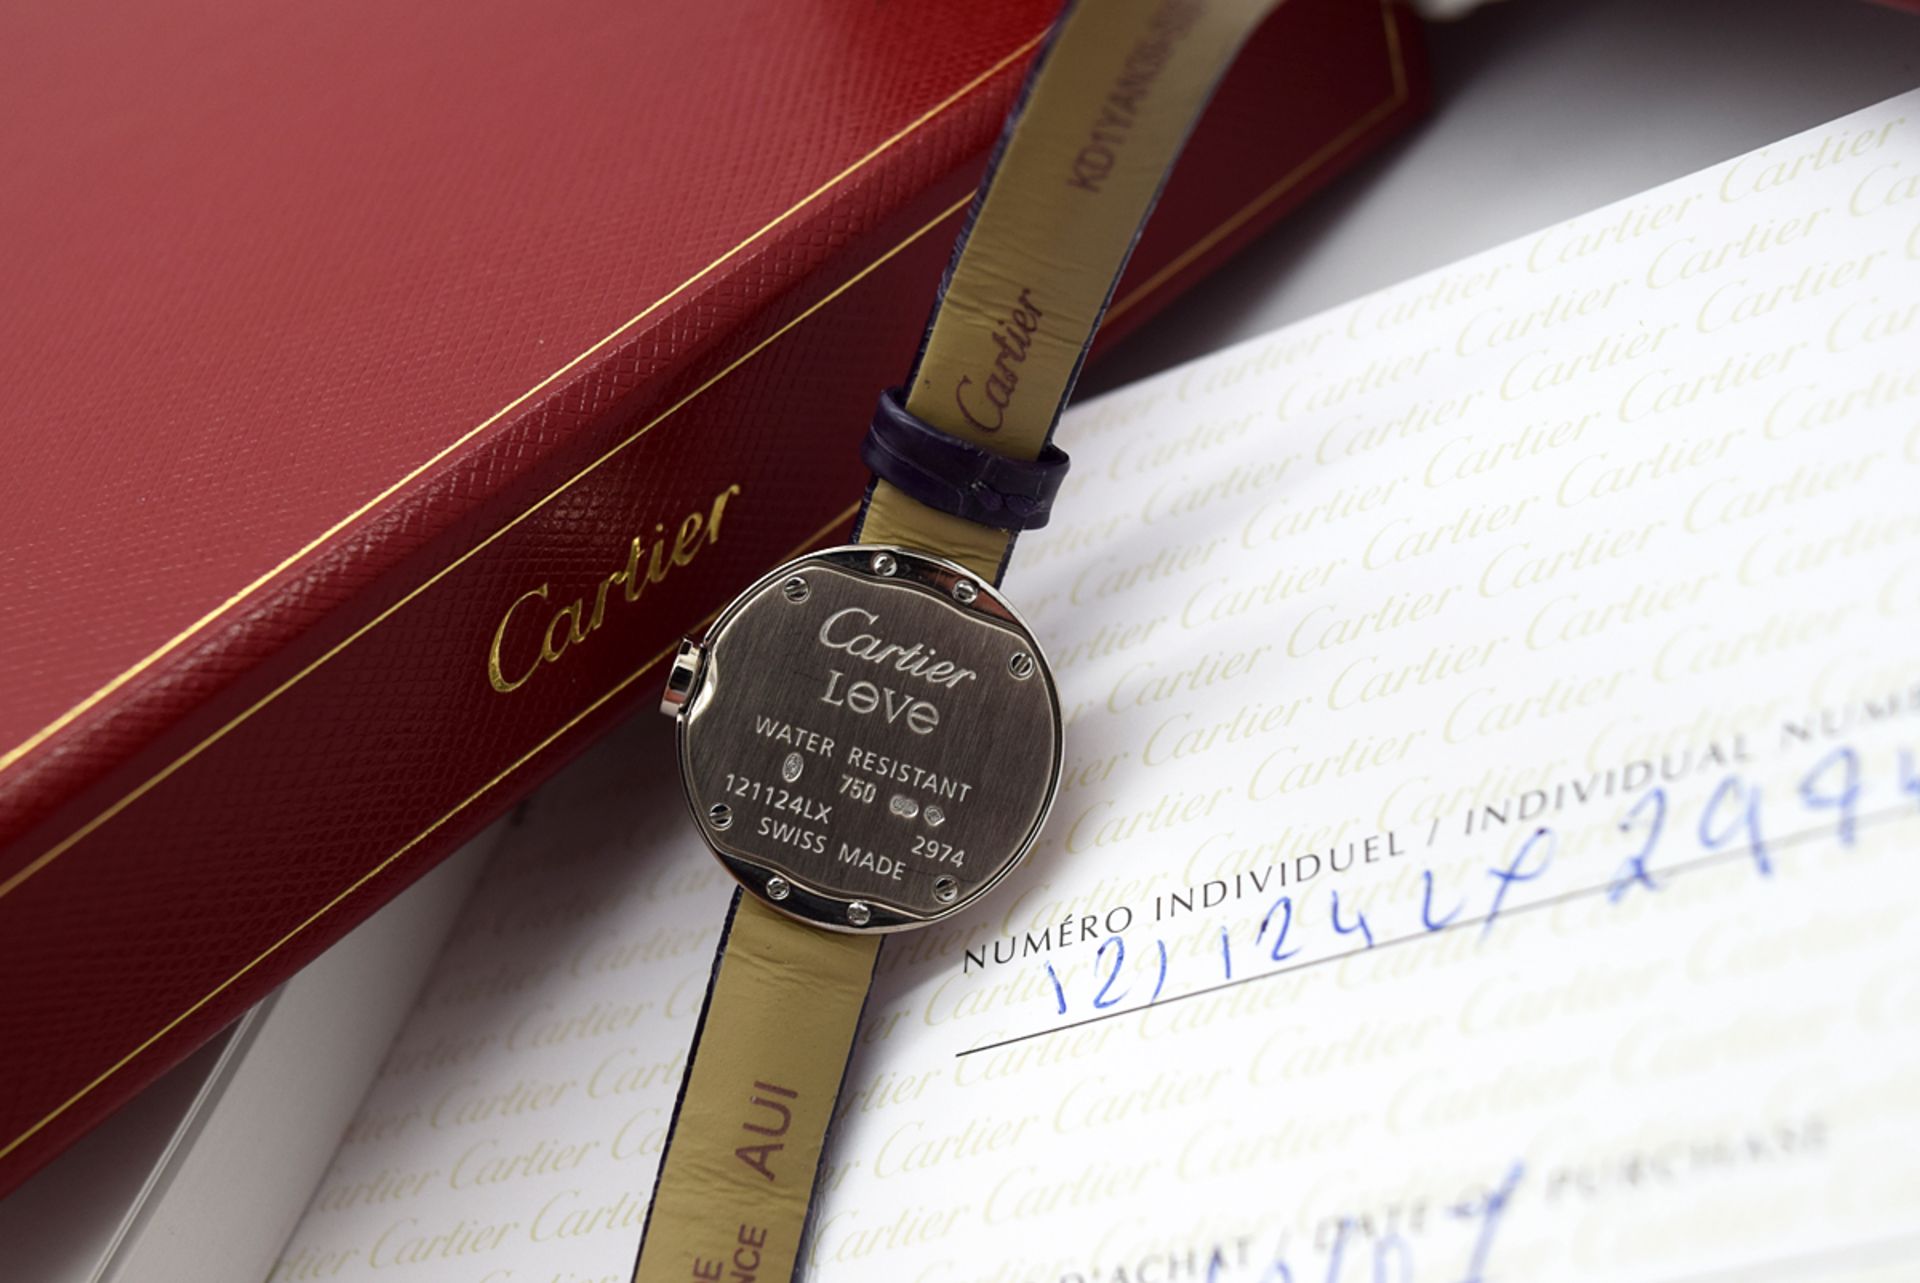 Cartier 'Love' Diamonds Watch - WE800131 - White Gold and Diamonds - Box and Papers! - Image 7 of 15